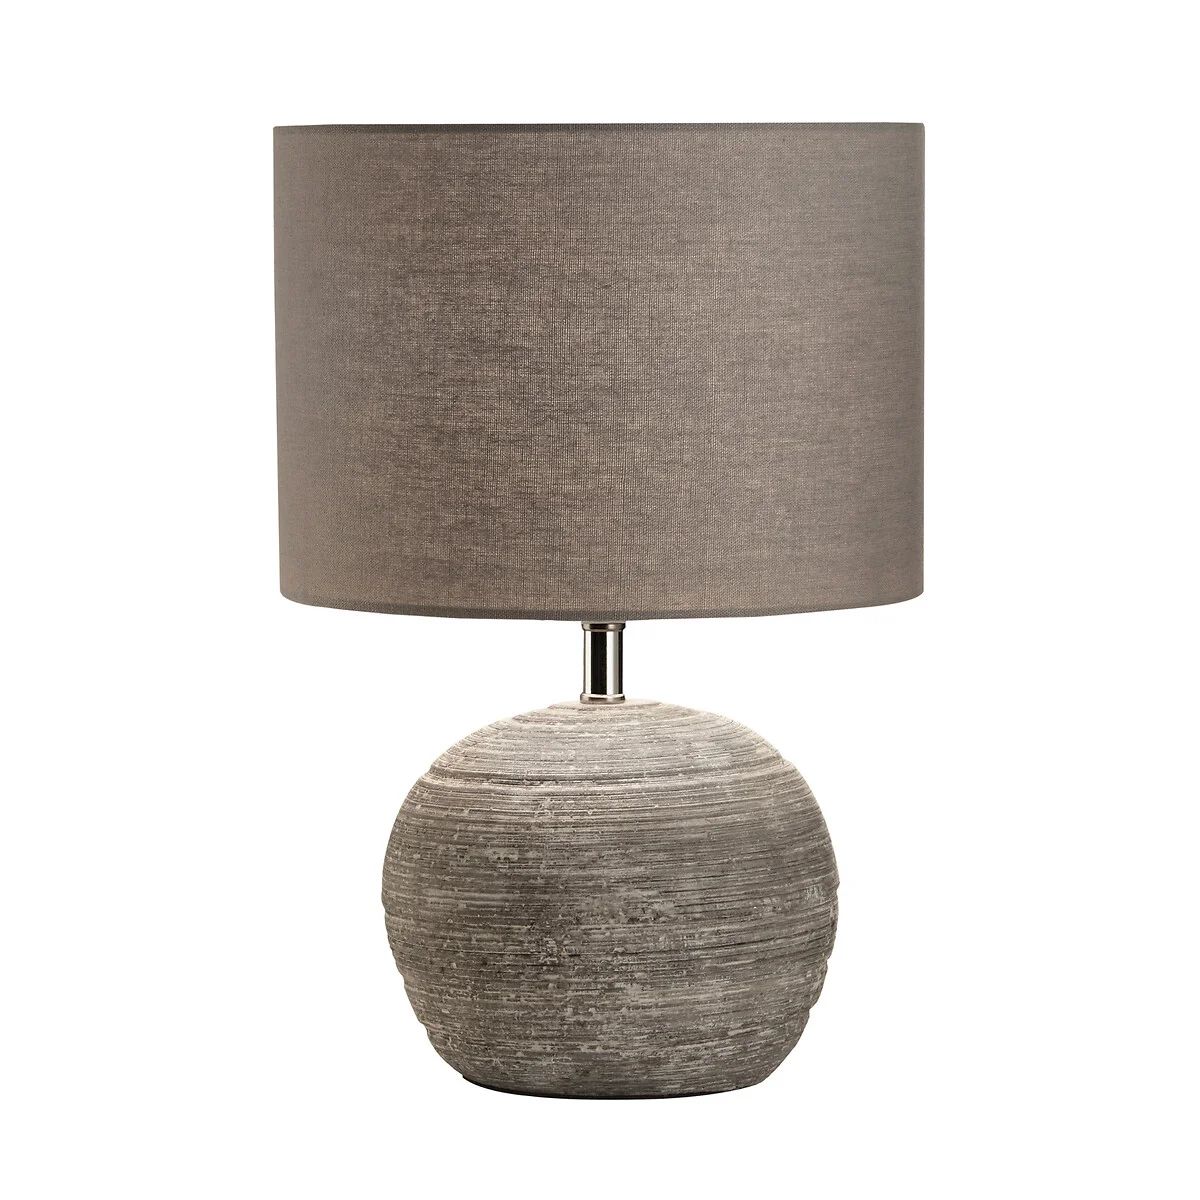 Grey Terracotta with Scratch Detailing Table Lamp | La Redoute (UK)